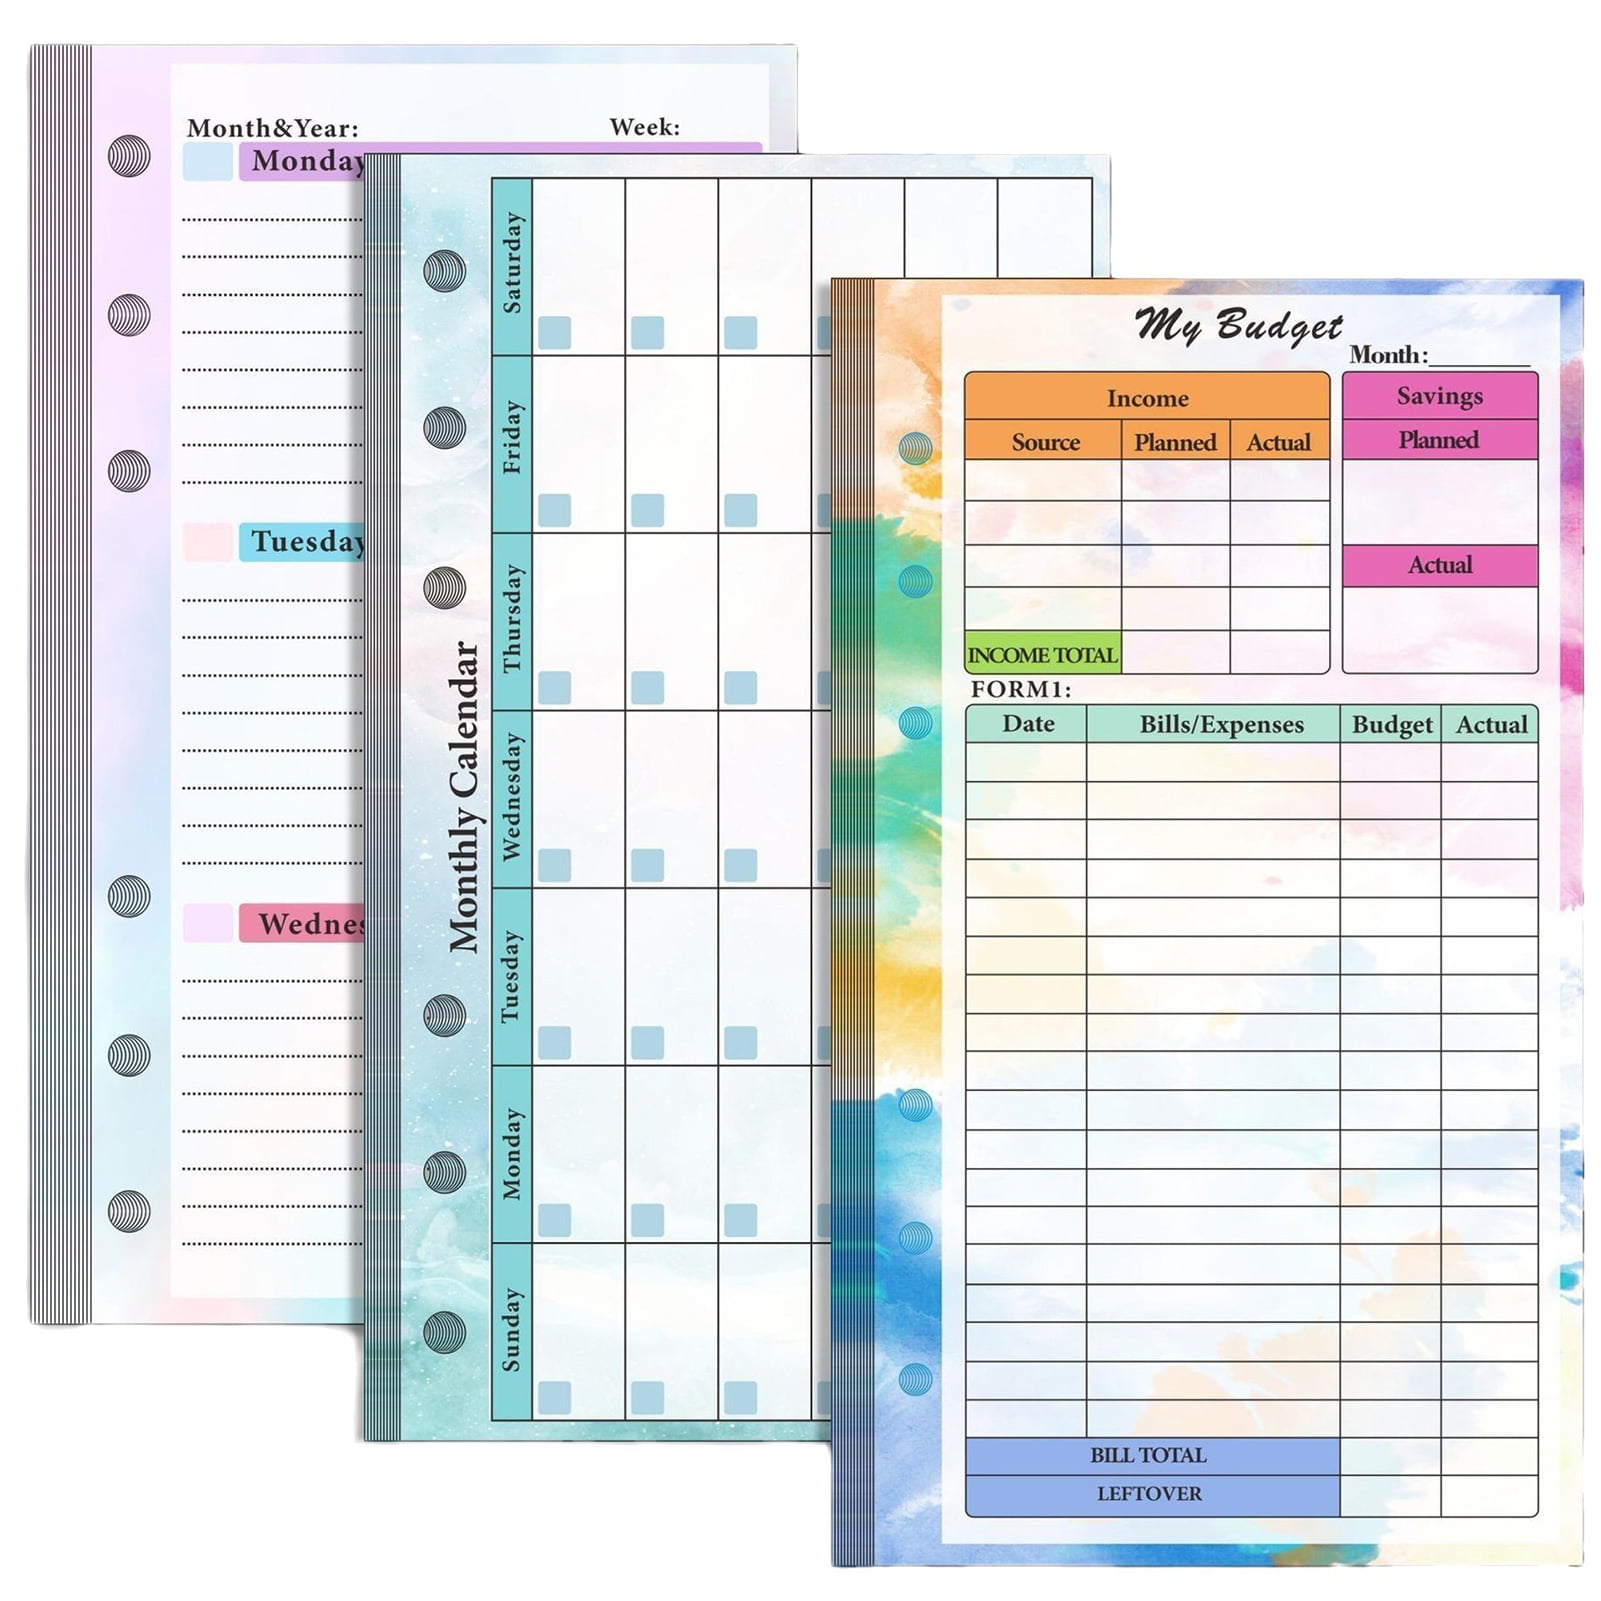 A6 Planner Inserts, A6 Inserts, A6 Daily Insert Printable, Daily